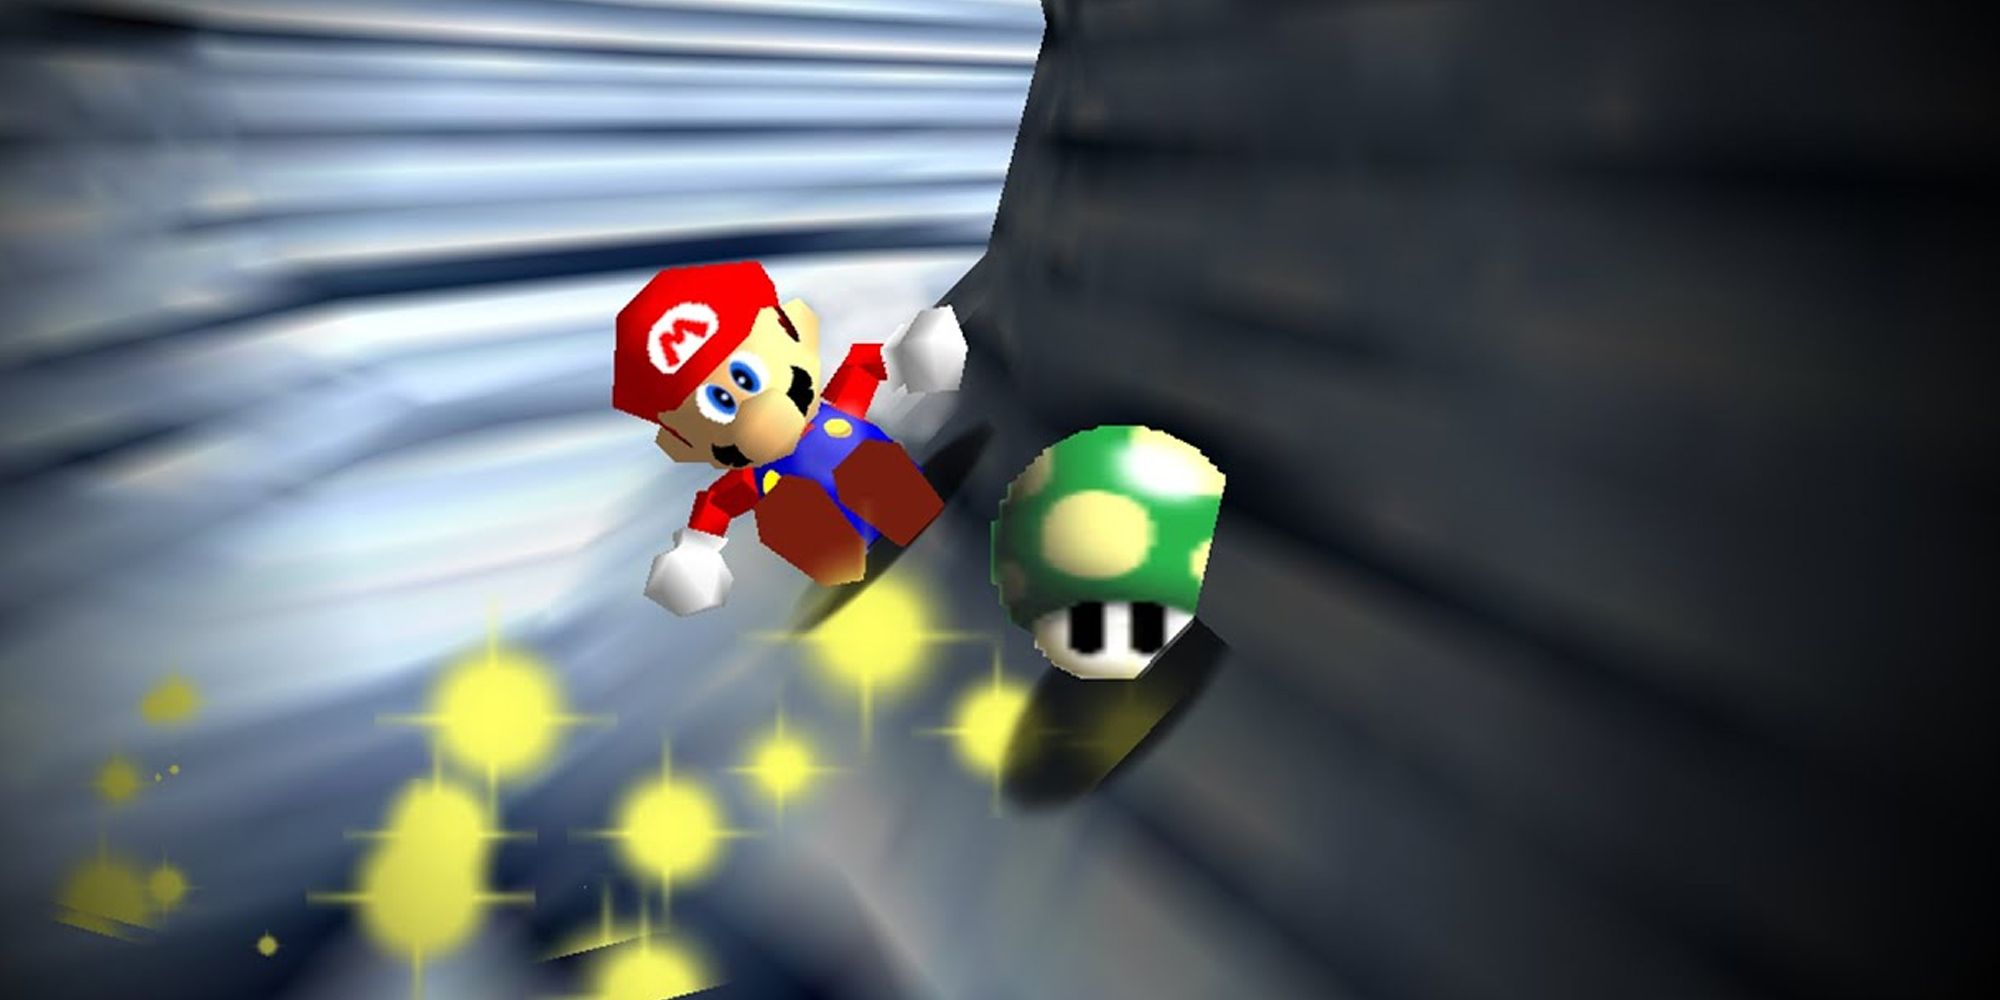 Super Mario 64 speedrunner sliding into a 1-Up in a tunnel